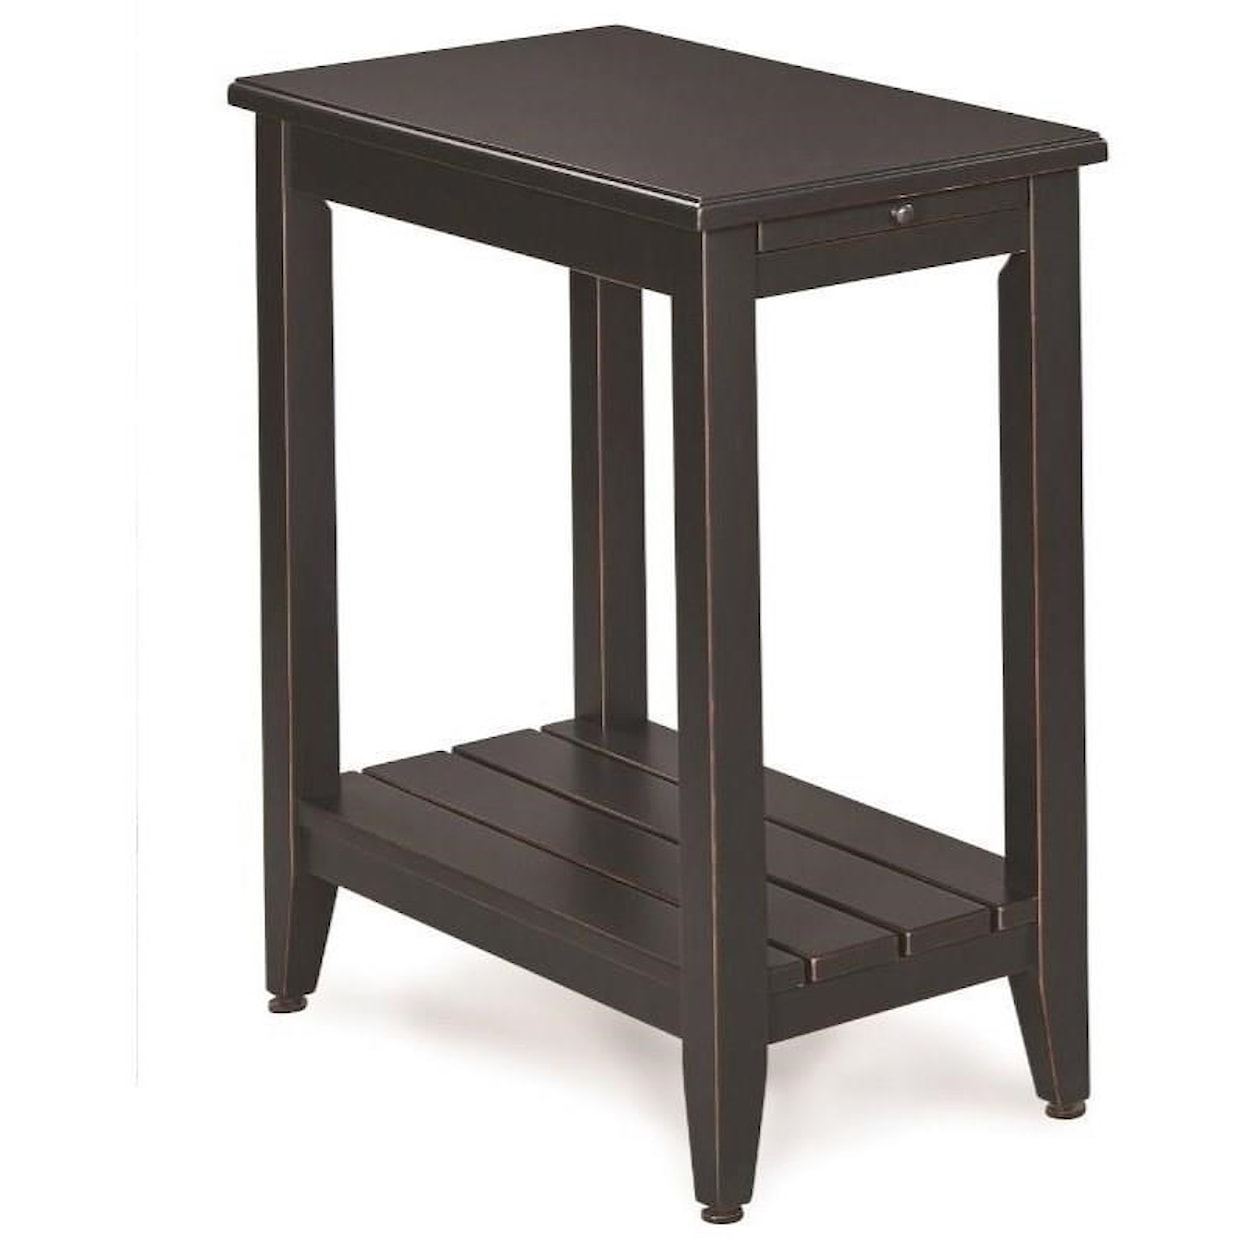 Null Furniture 6618 Expressions Chairside End Table